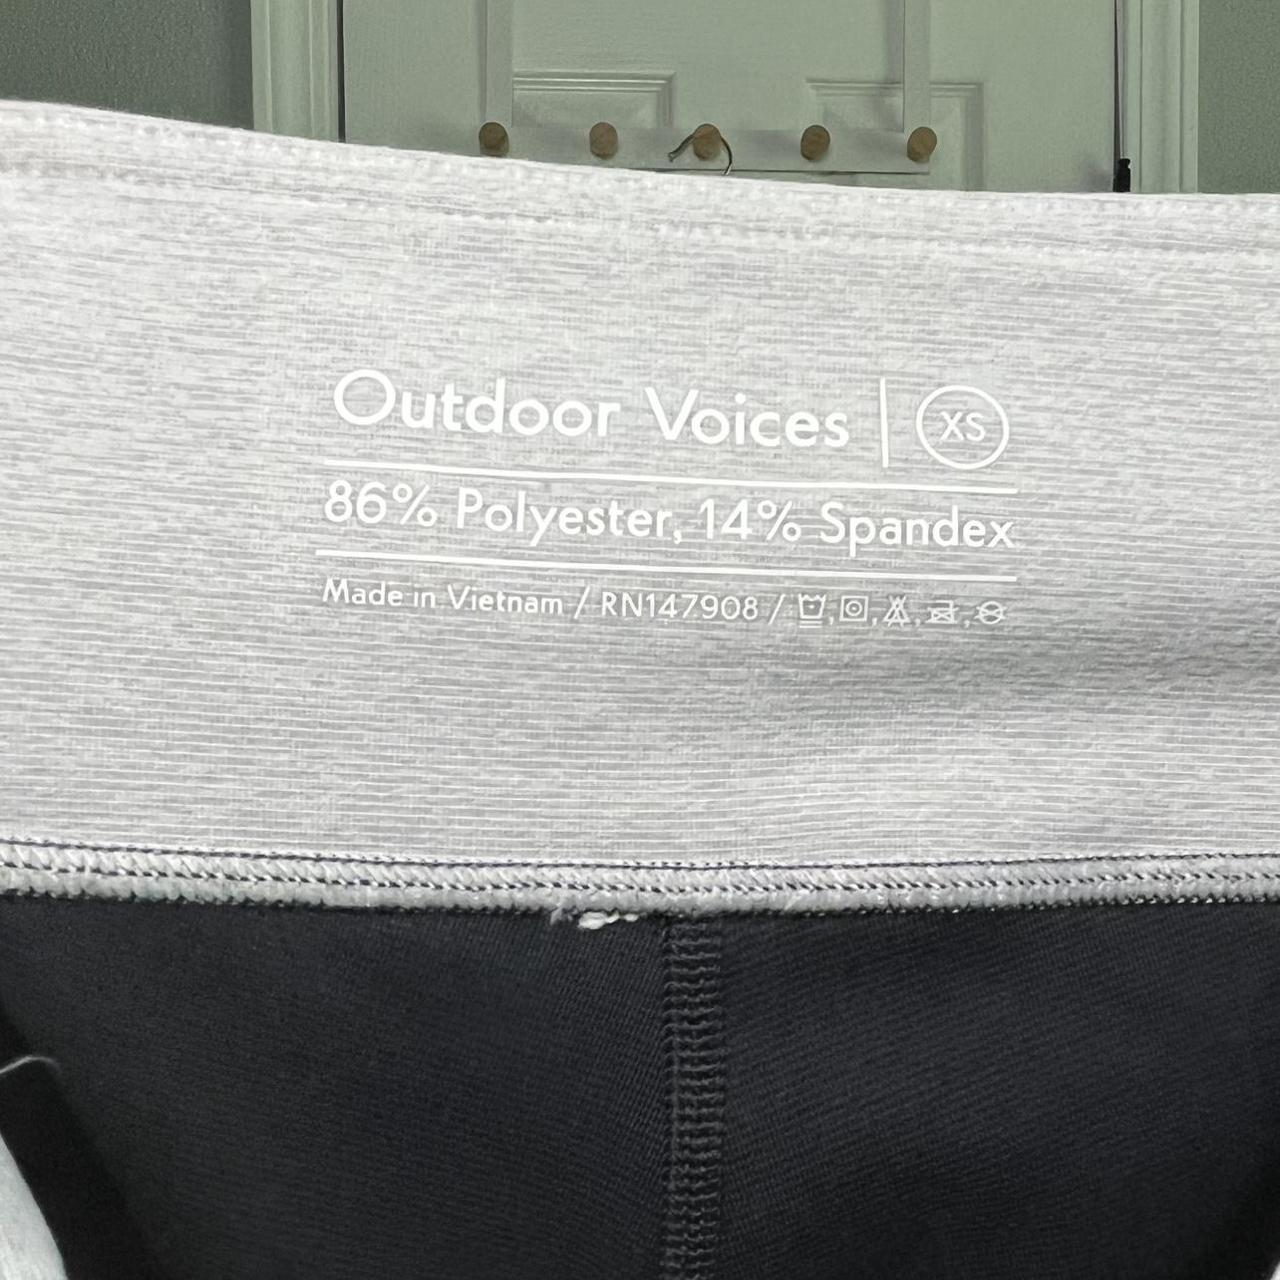 Shipping included! , Outdoor voices Spring 7/8